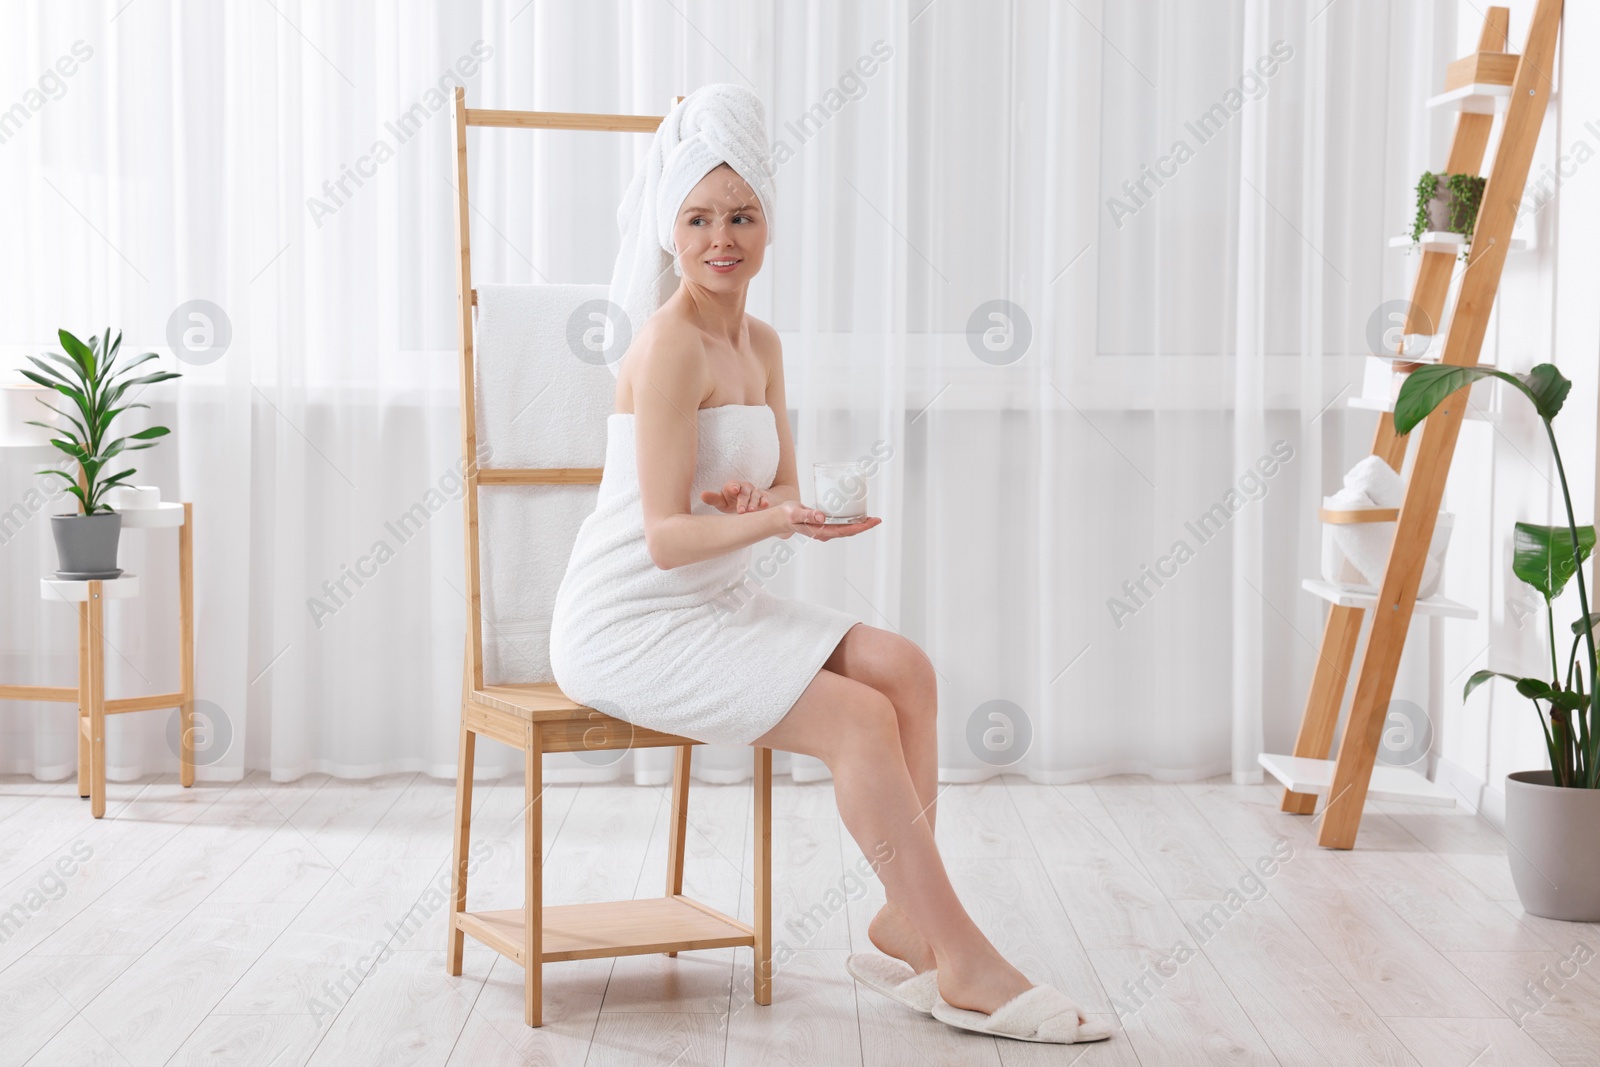 Photo of Beautiful young woman applying body cream onto arm indoors